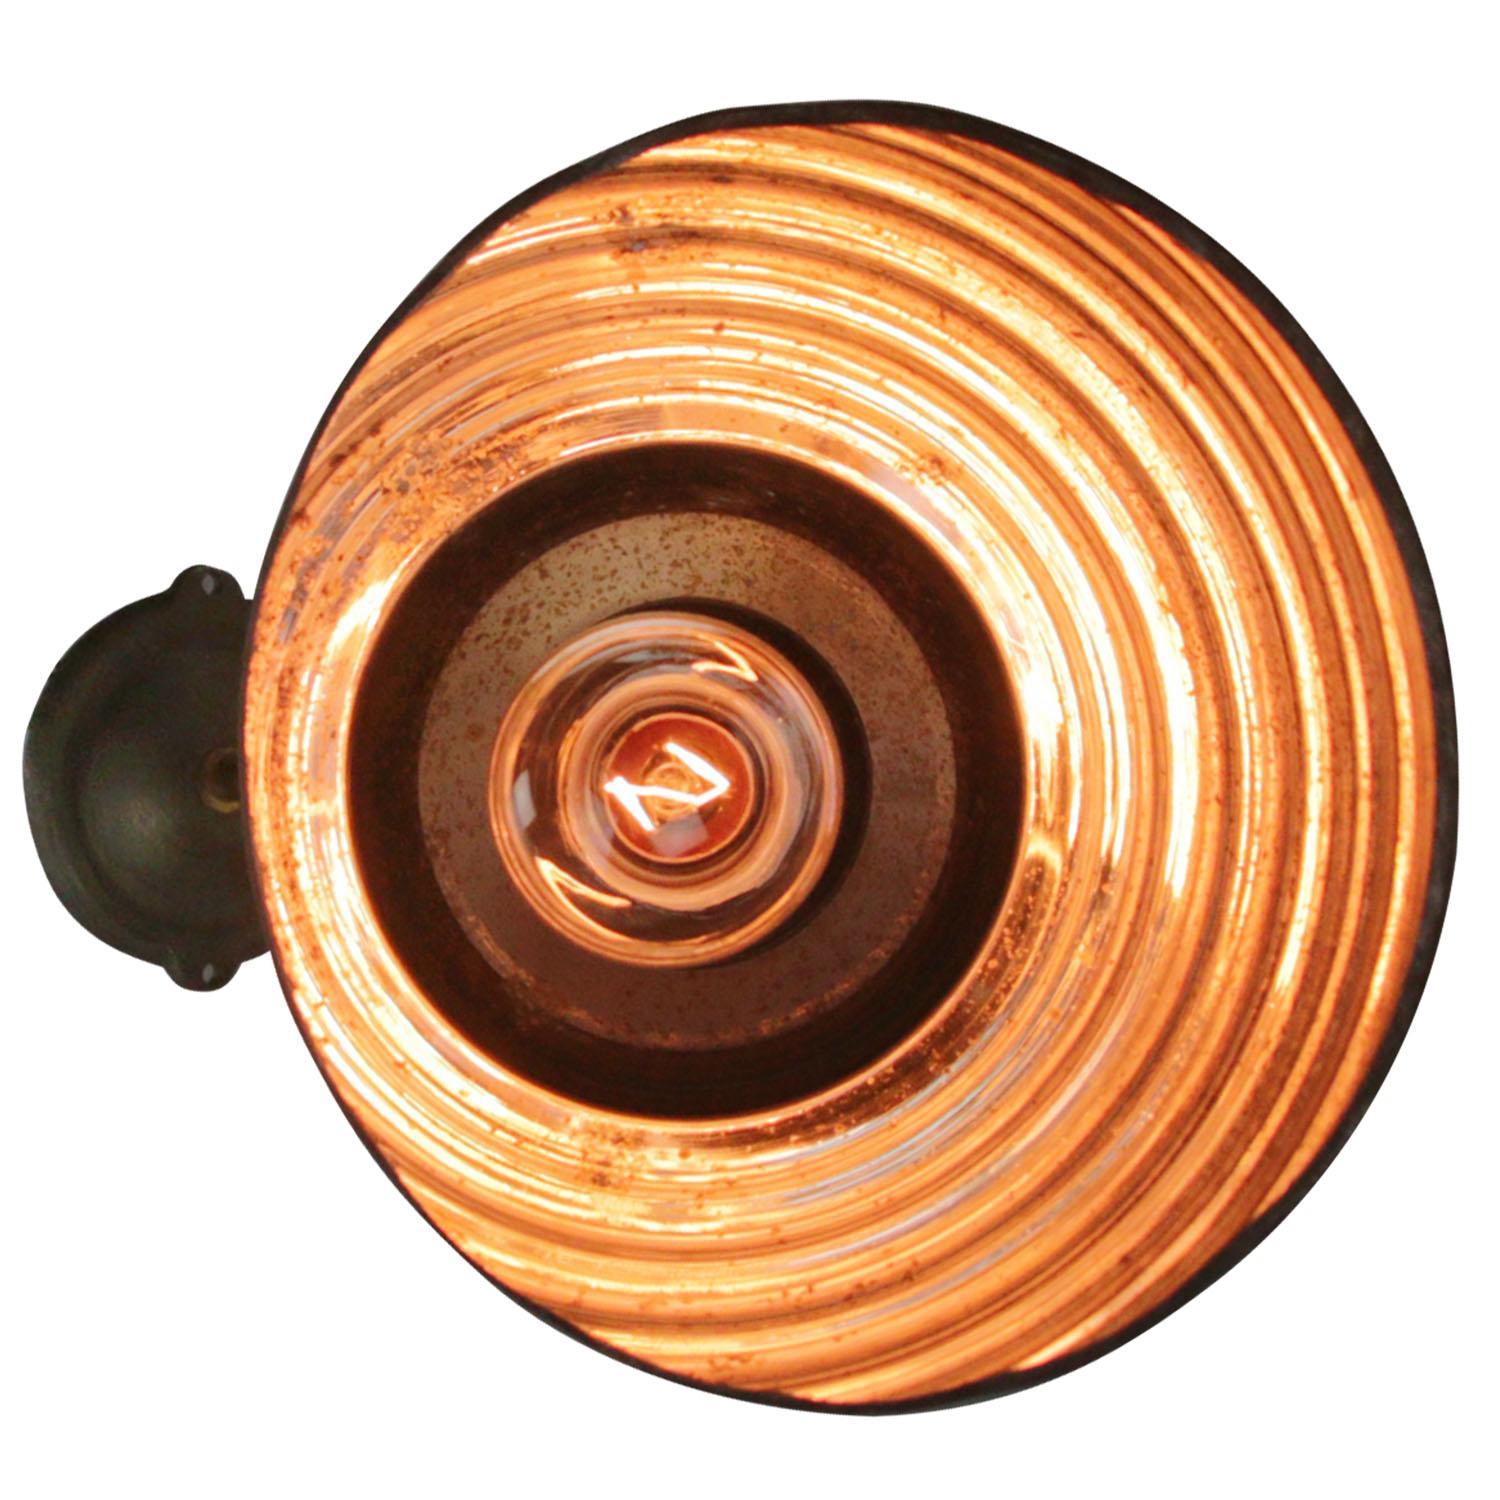 Mercury glass wall lamp
Brass with mirror glass shade

Diameter wall mount 10 cm

Weight: 0.70 kg / 1.5 lb

Priced per individual item. All lamps have been made suitable by international standards for incandescent light bulbs,